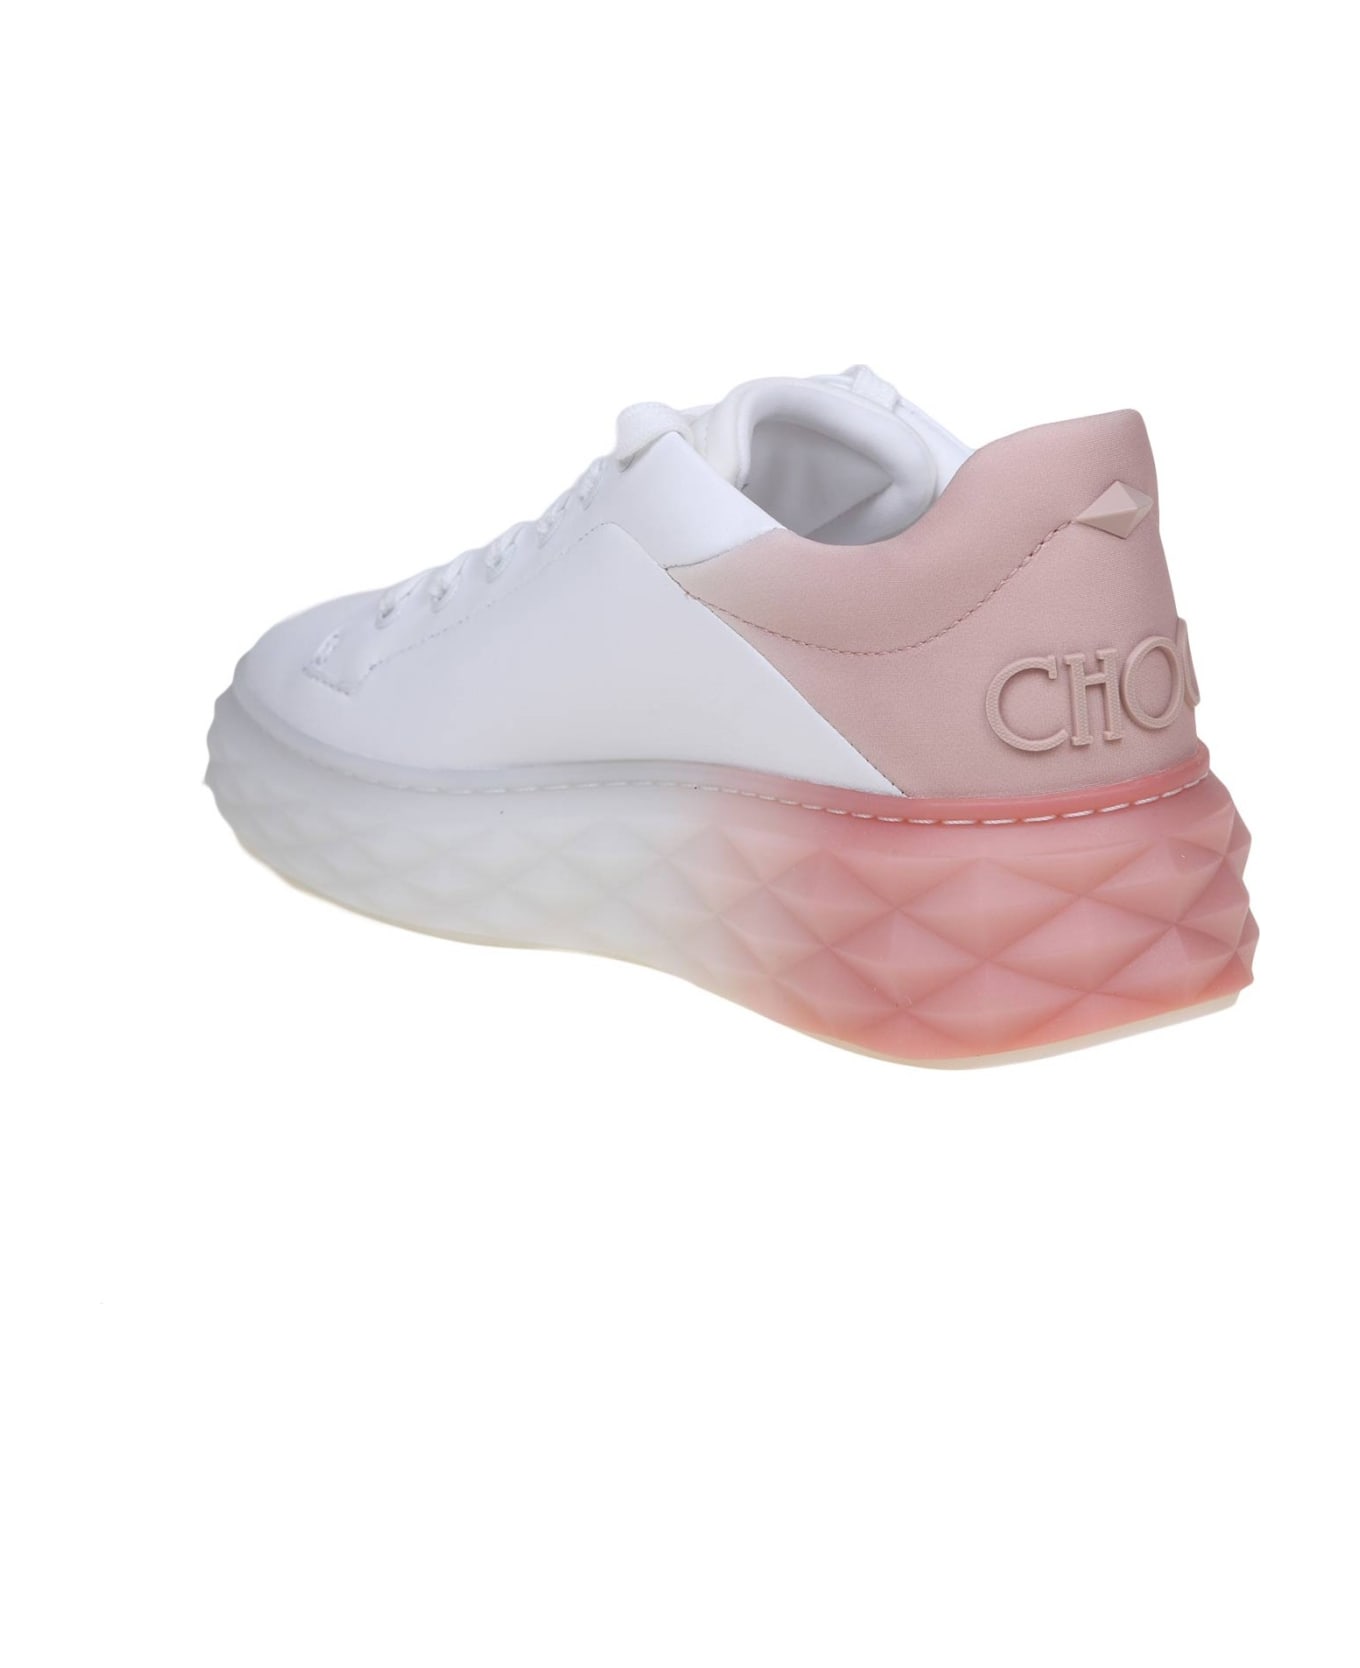 Jimmy Choo Diamond Maxi Sneakers In White And Pink Leather - WHITE/MACARON MIX